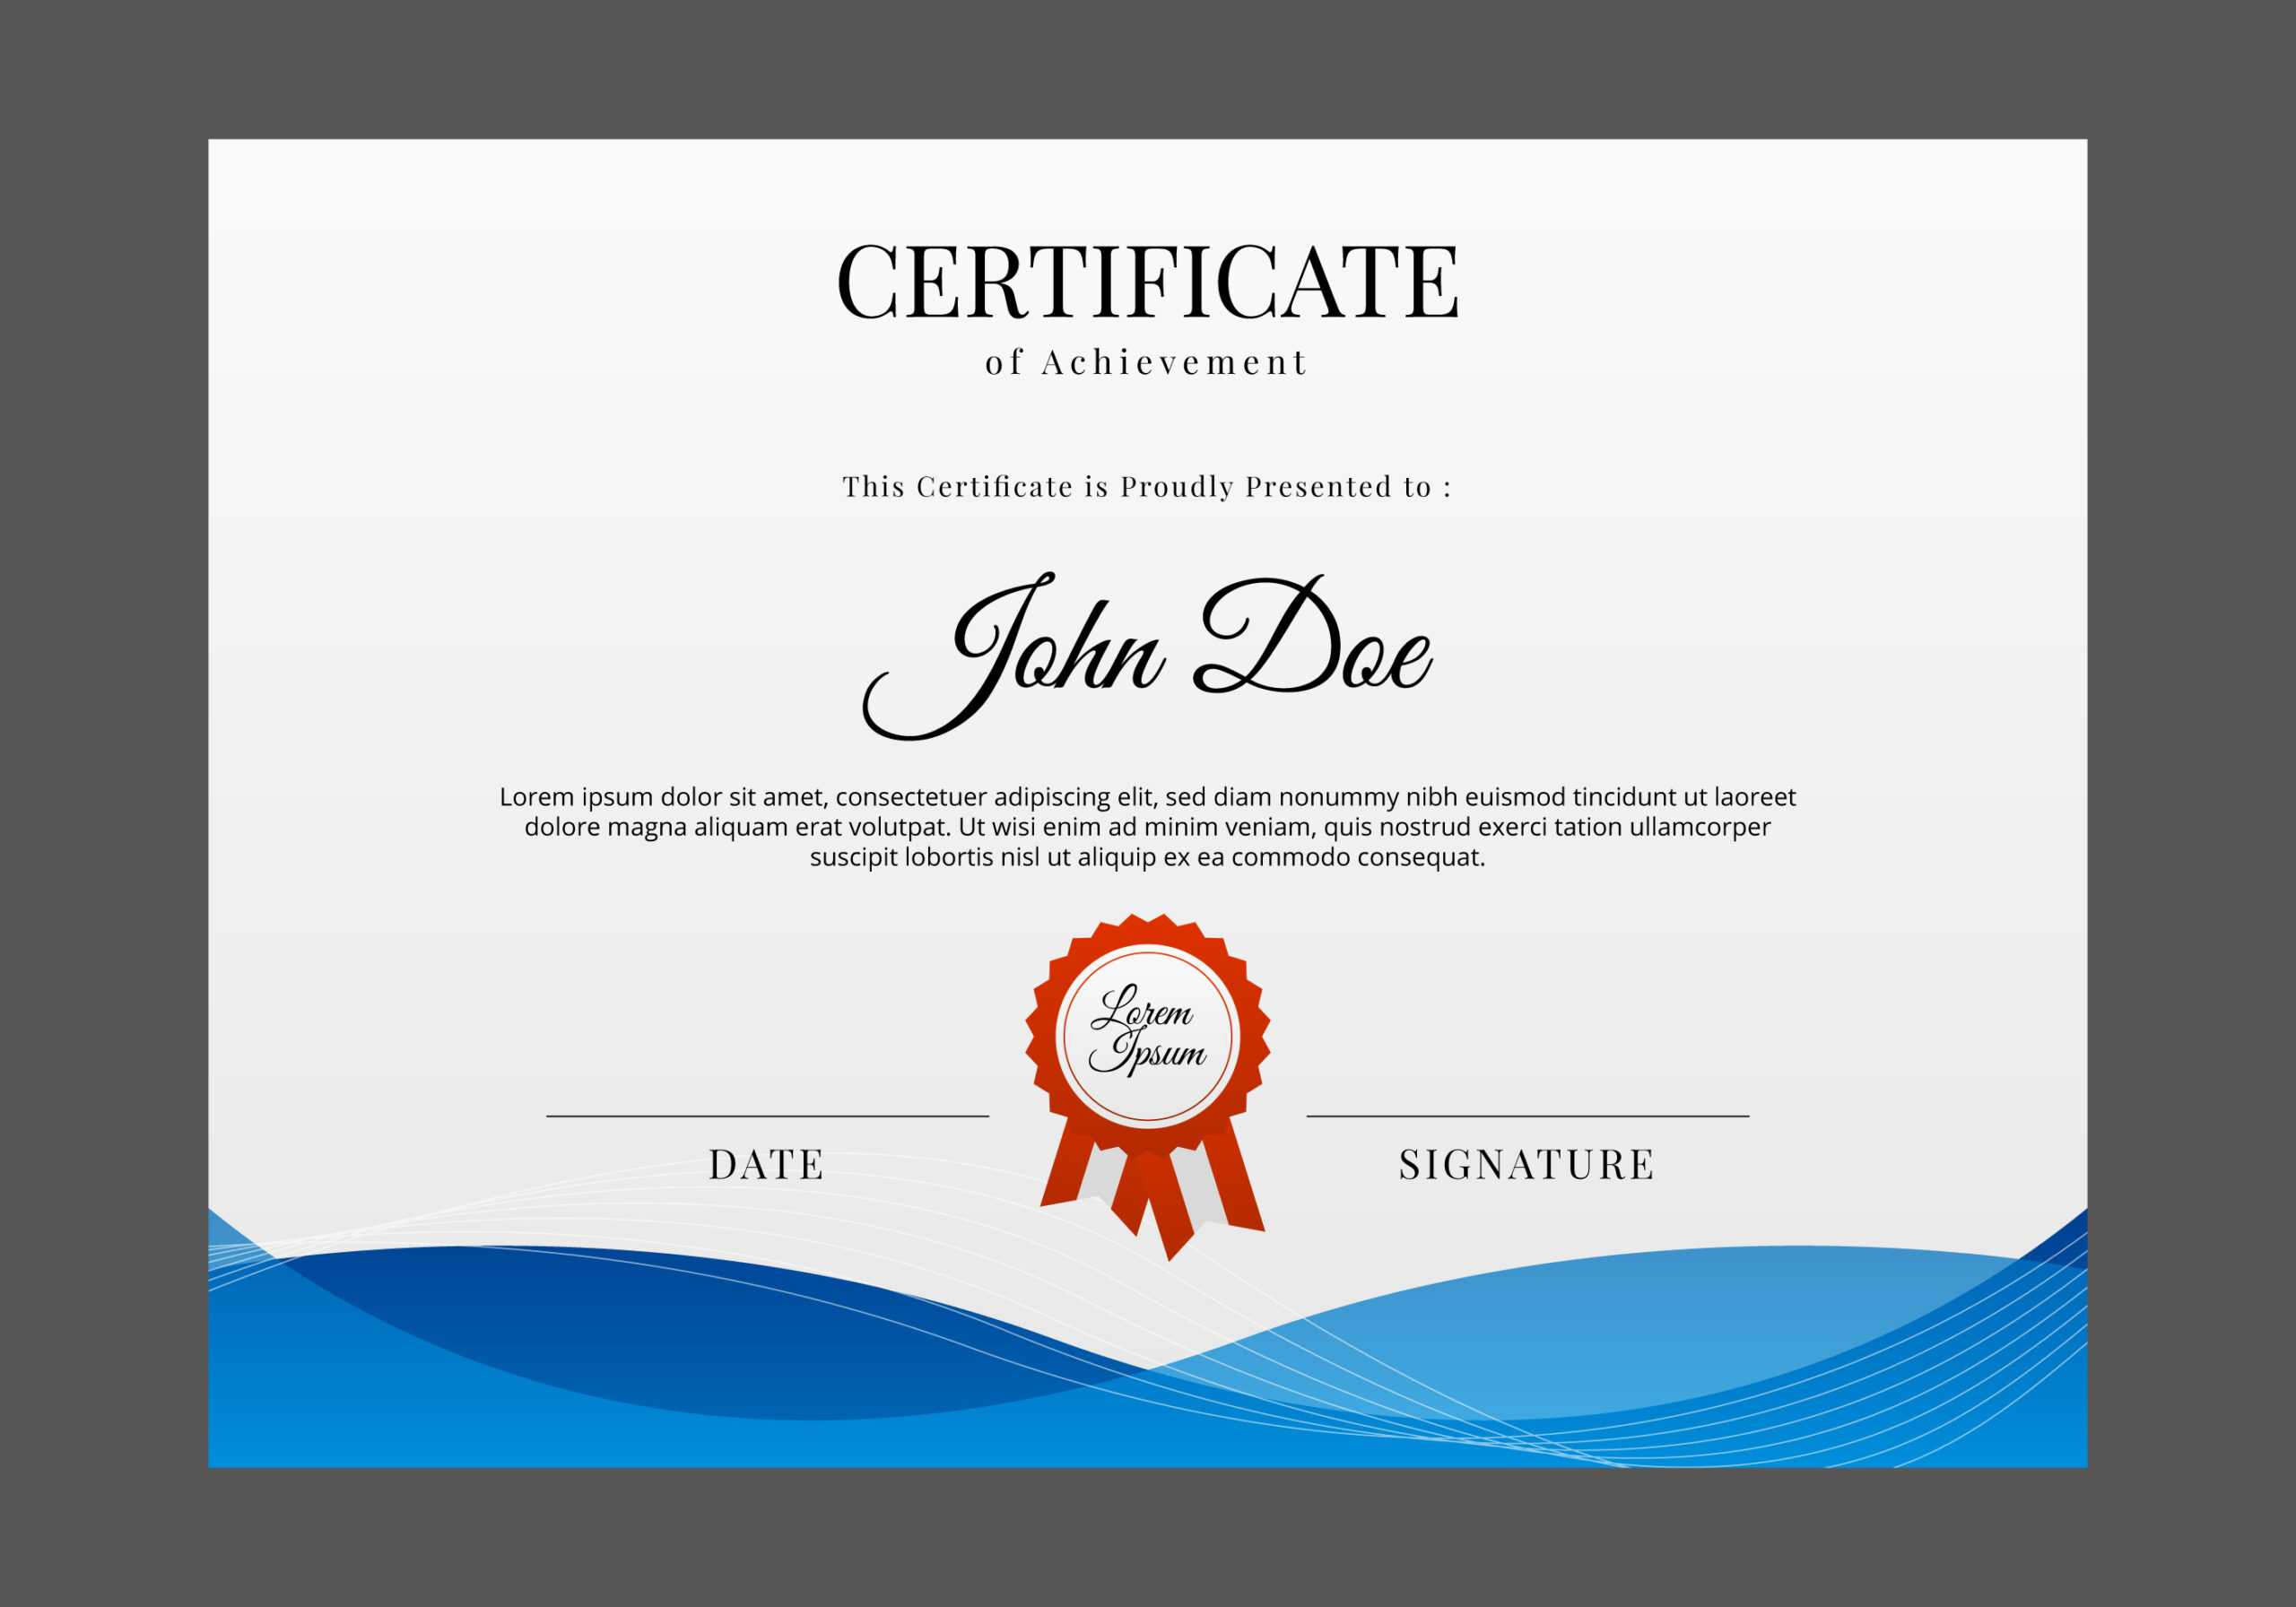 Certificate Templates, Free Certificate Designs With Regard To Professional Certificate Templates For Word